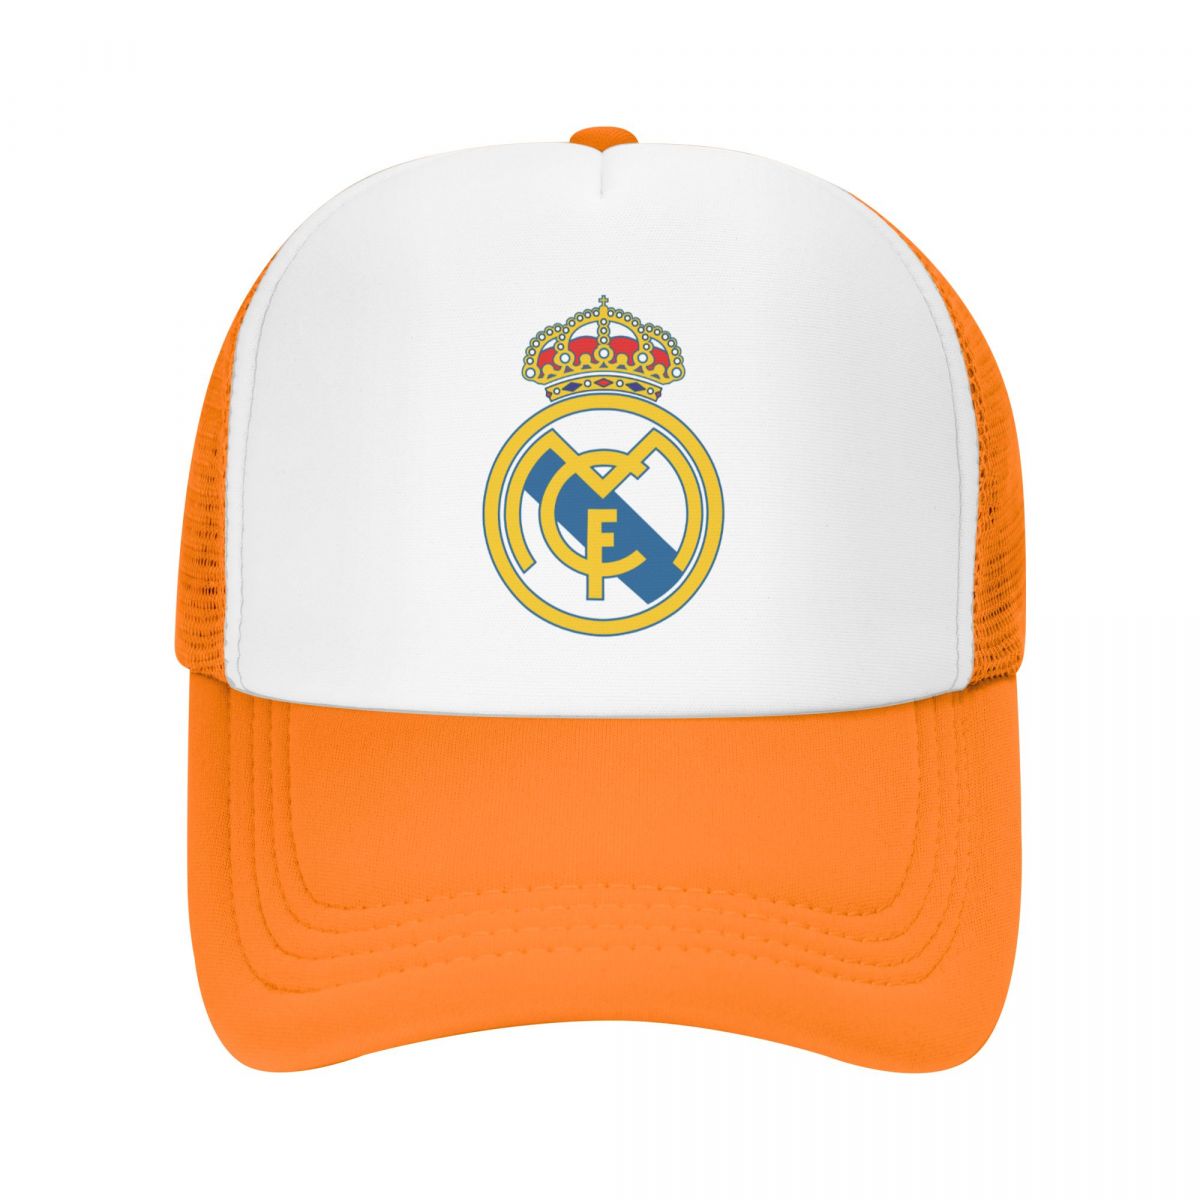 Real Madrid Funny Trucker Hat for Adult, Adjustable Washable Baseball Cap,  Fishing Hats Funny Gifts for Men and Women